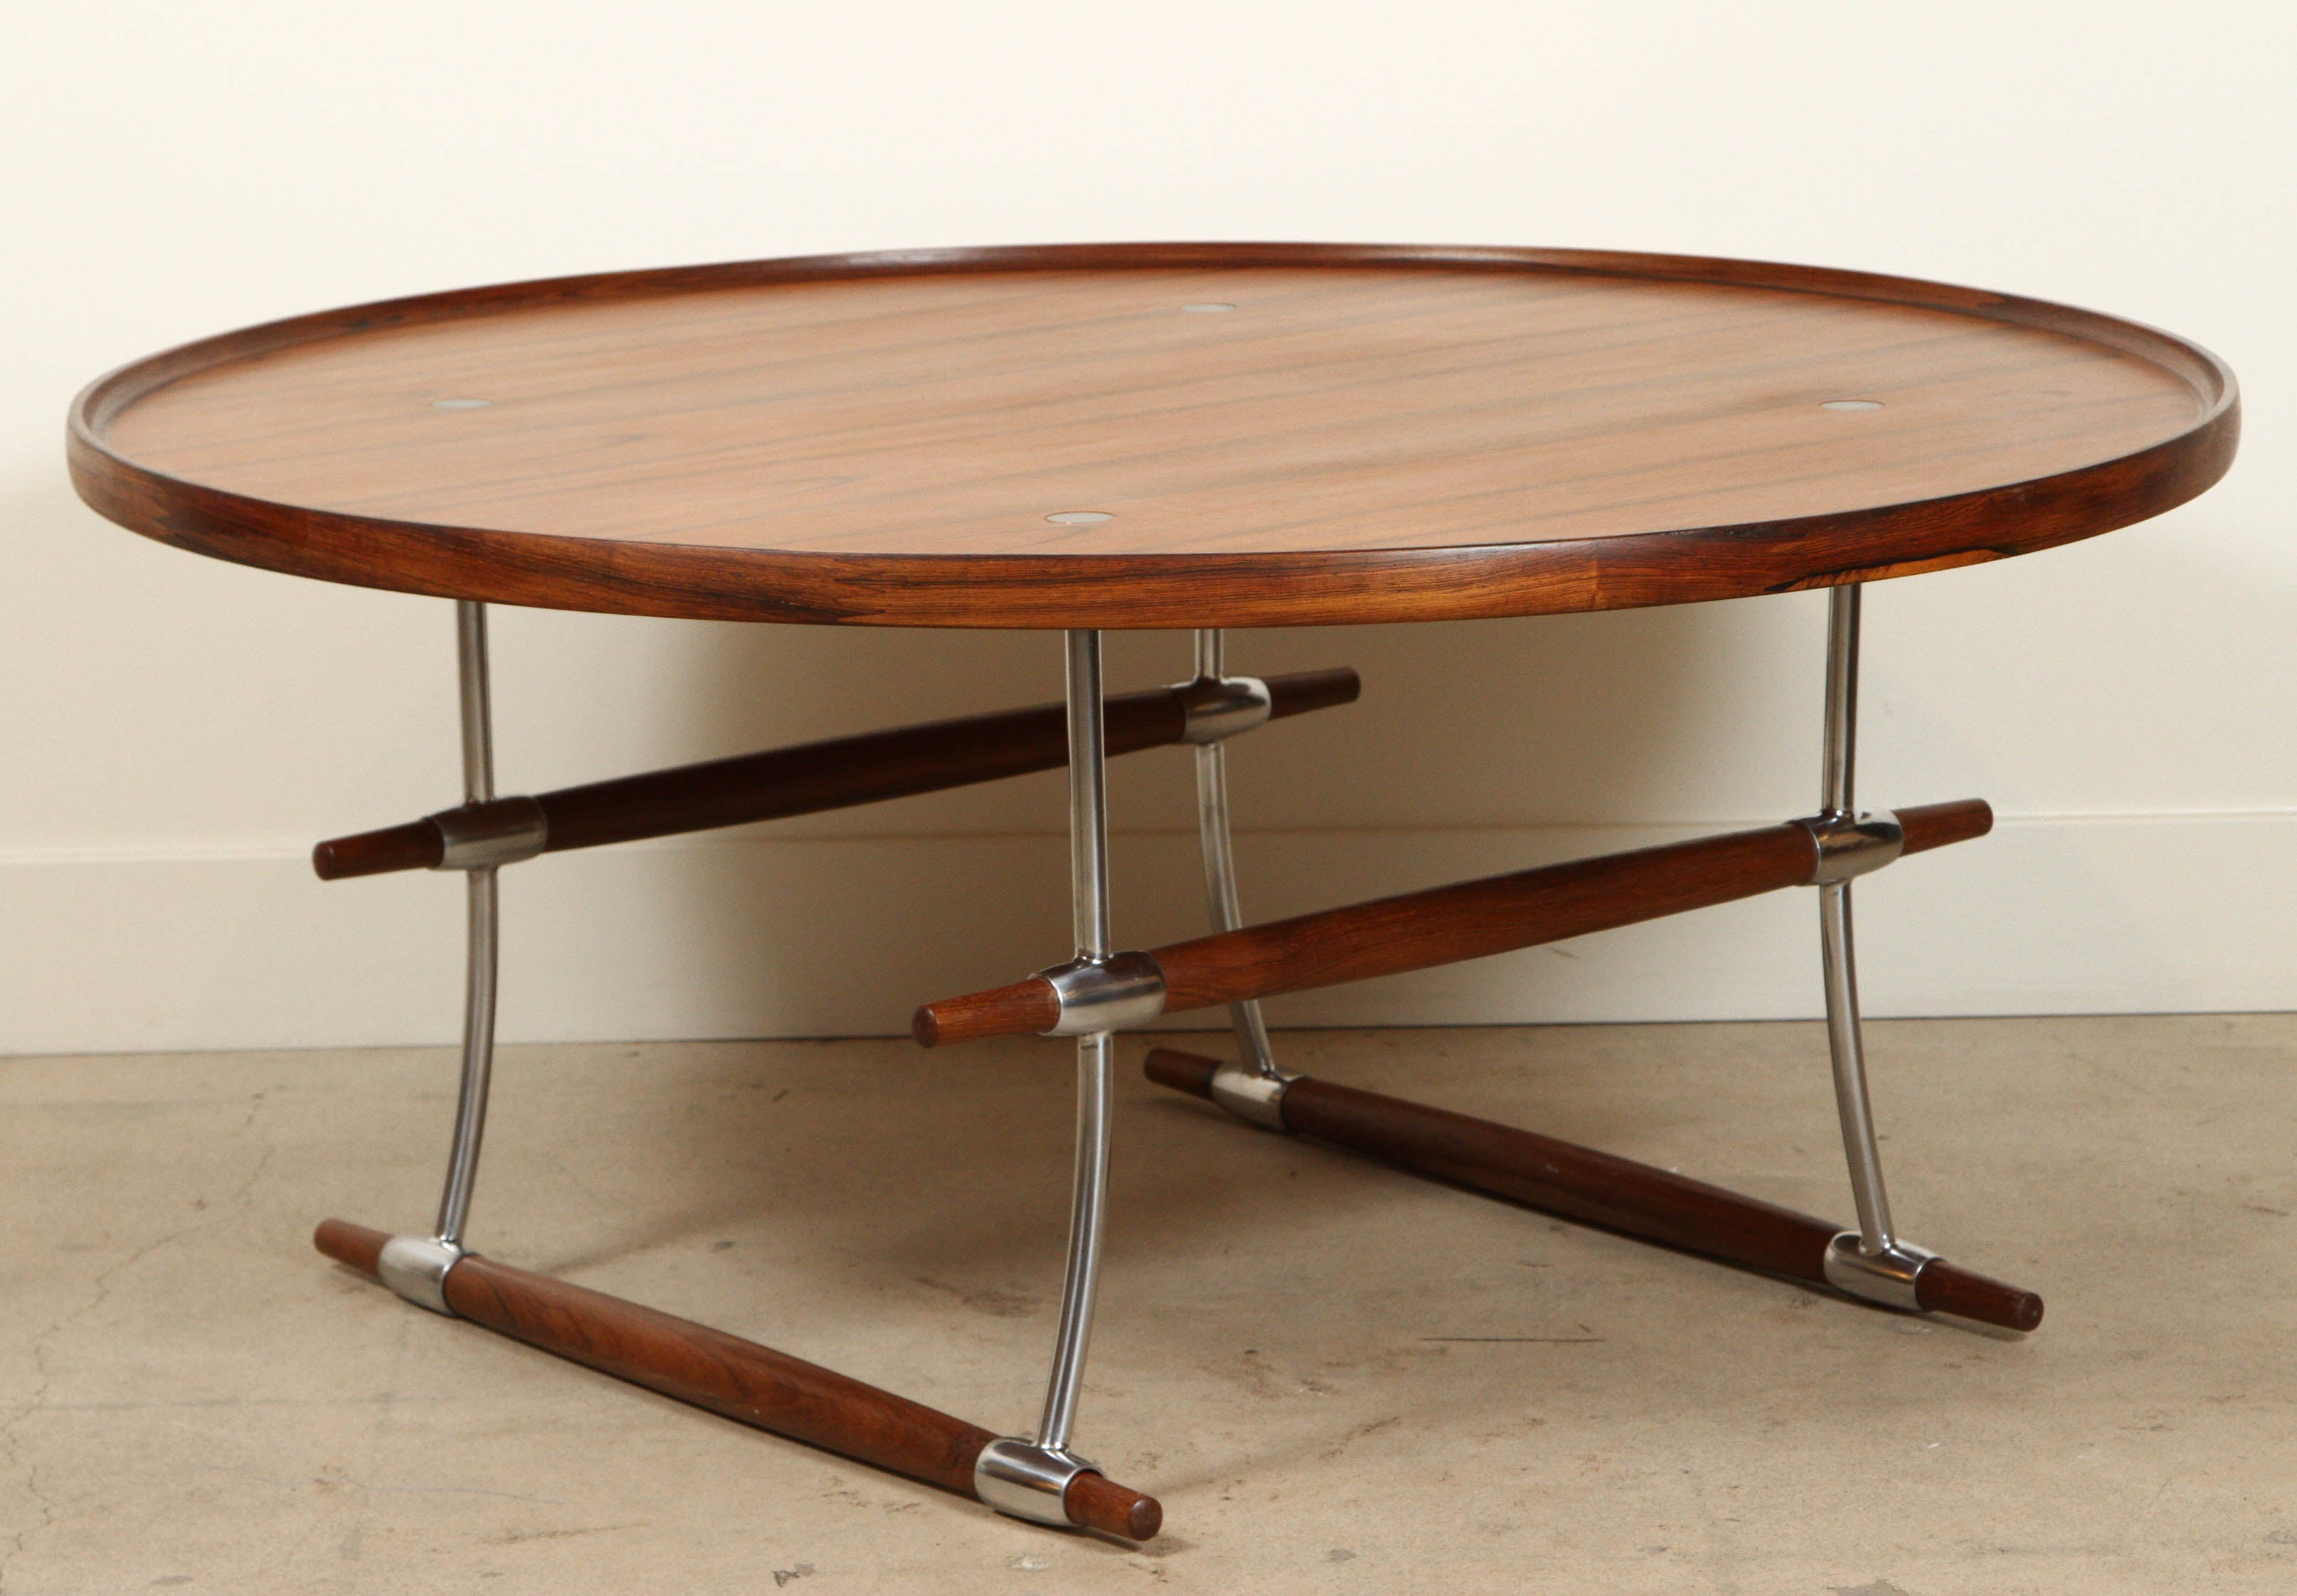 Rosewood "Stokke" Coffee Table by Jens H. Quistgaard